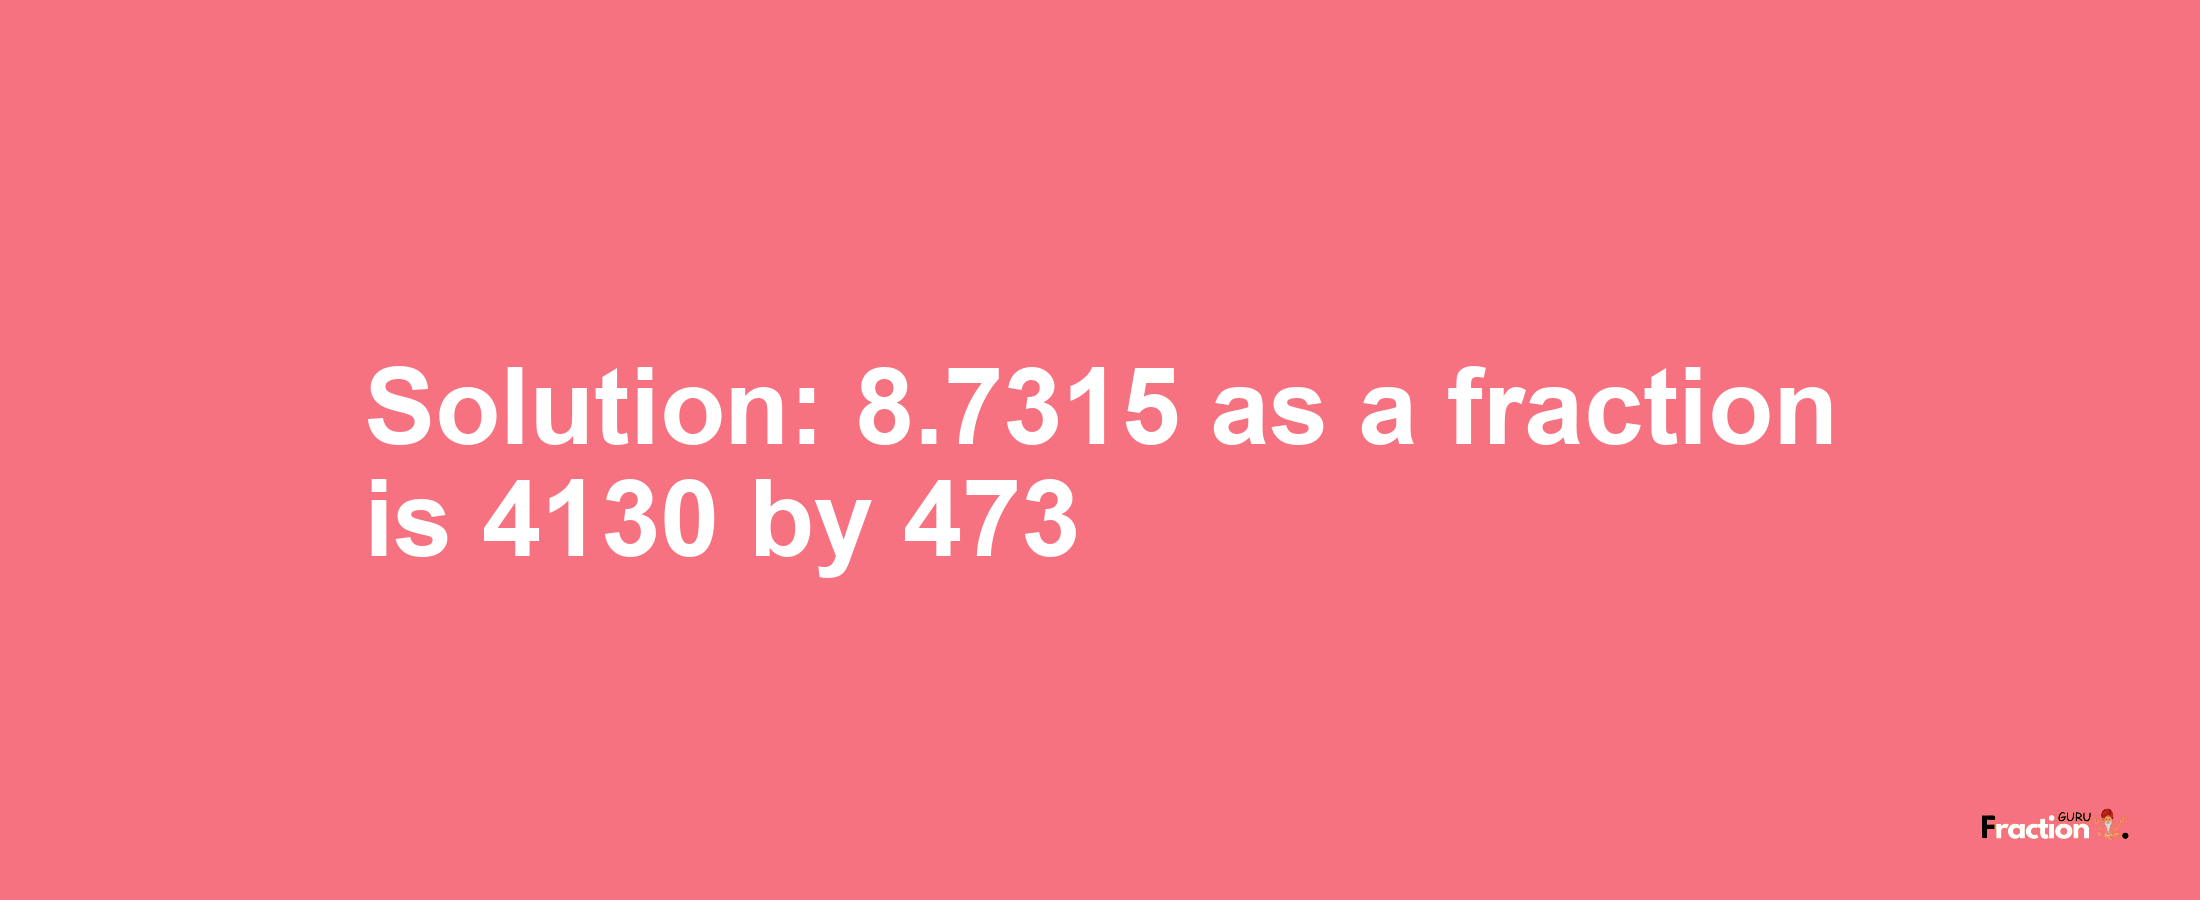 Solution:8.7315 as a fraction is 4130/473